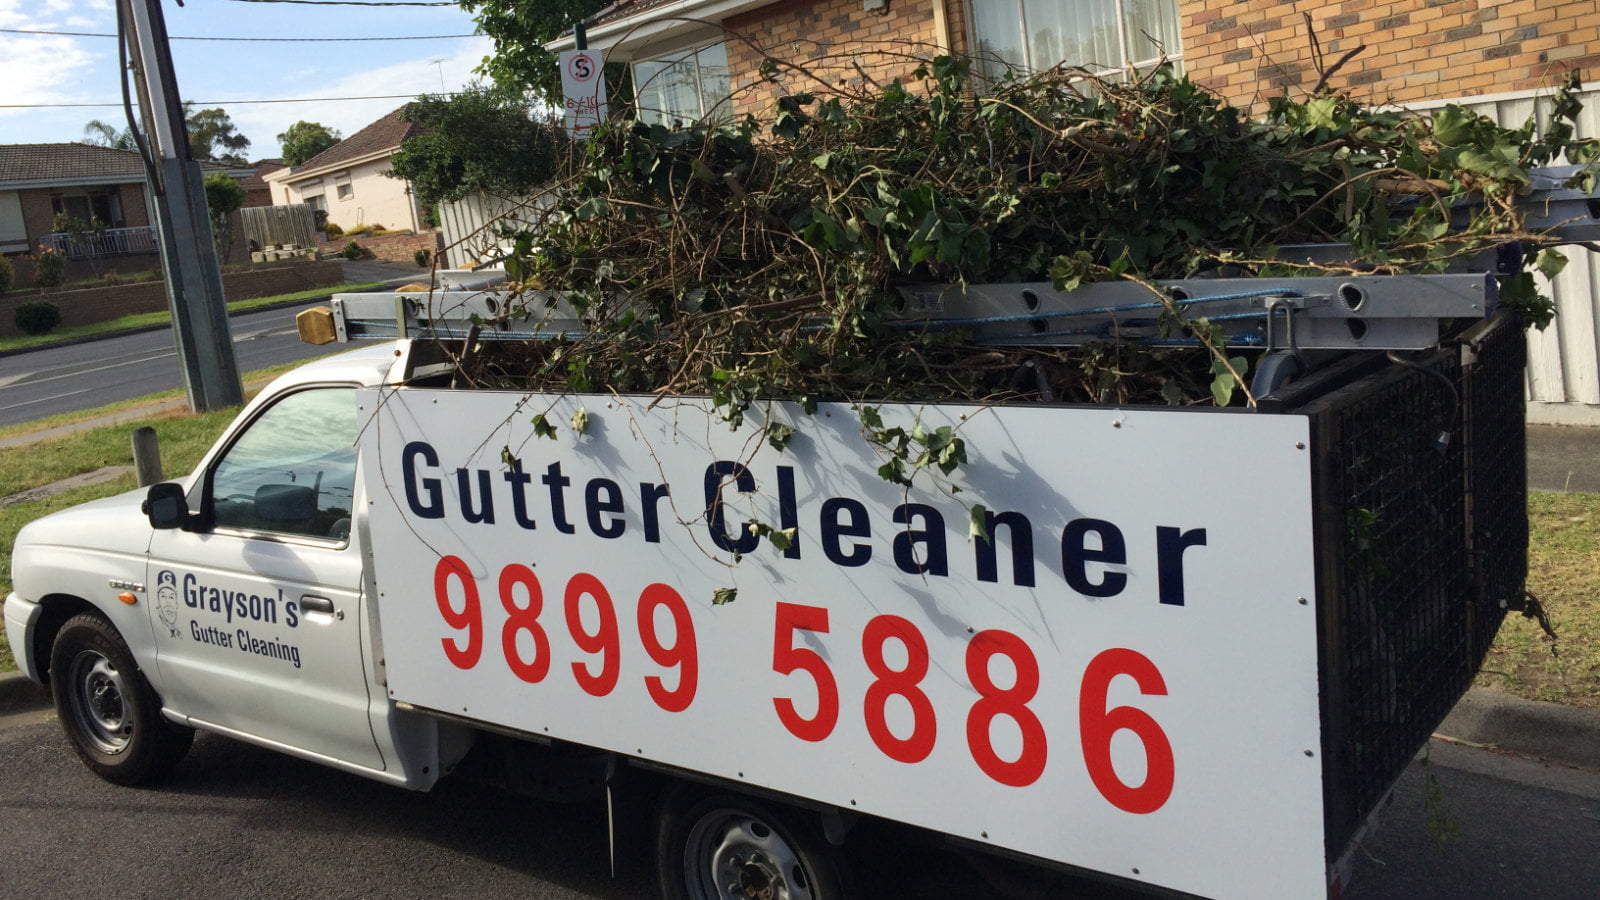 Gutter Cleaning and Tree Pruning